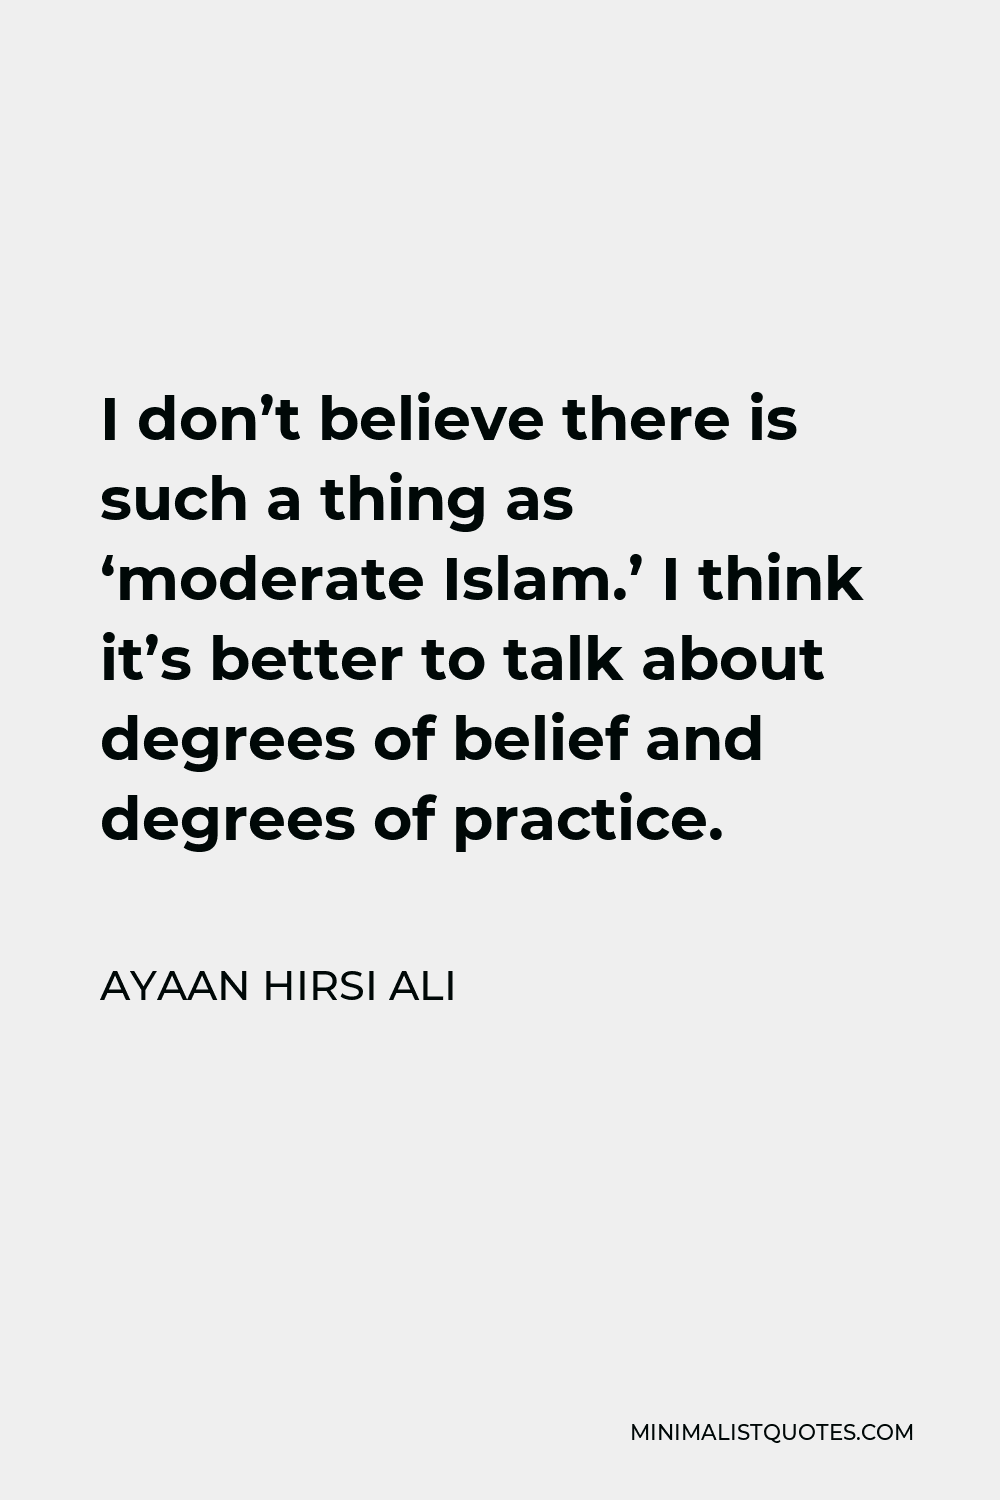 Ayaan Hirsi Ali Quote - I don’t believe there is such a thing as ‘moderate Islam.’ I think it’s better to talk about degrees of belief and degrees of practice.